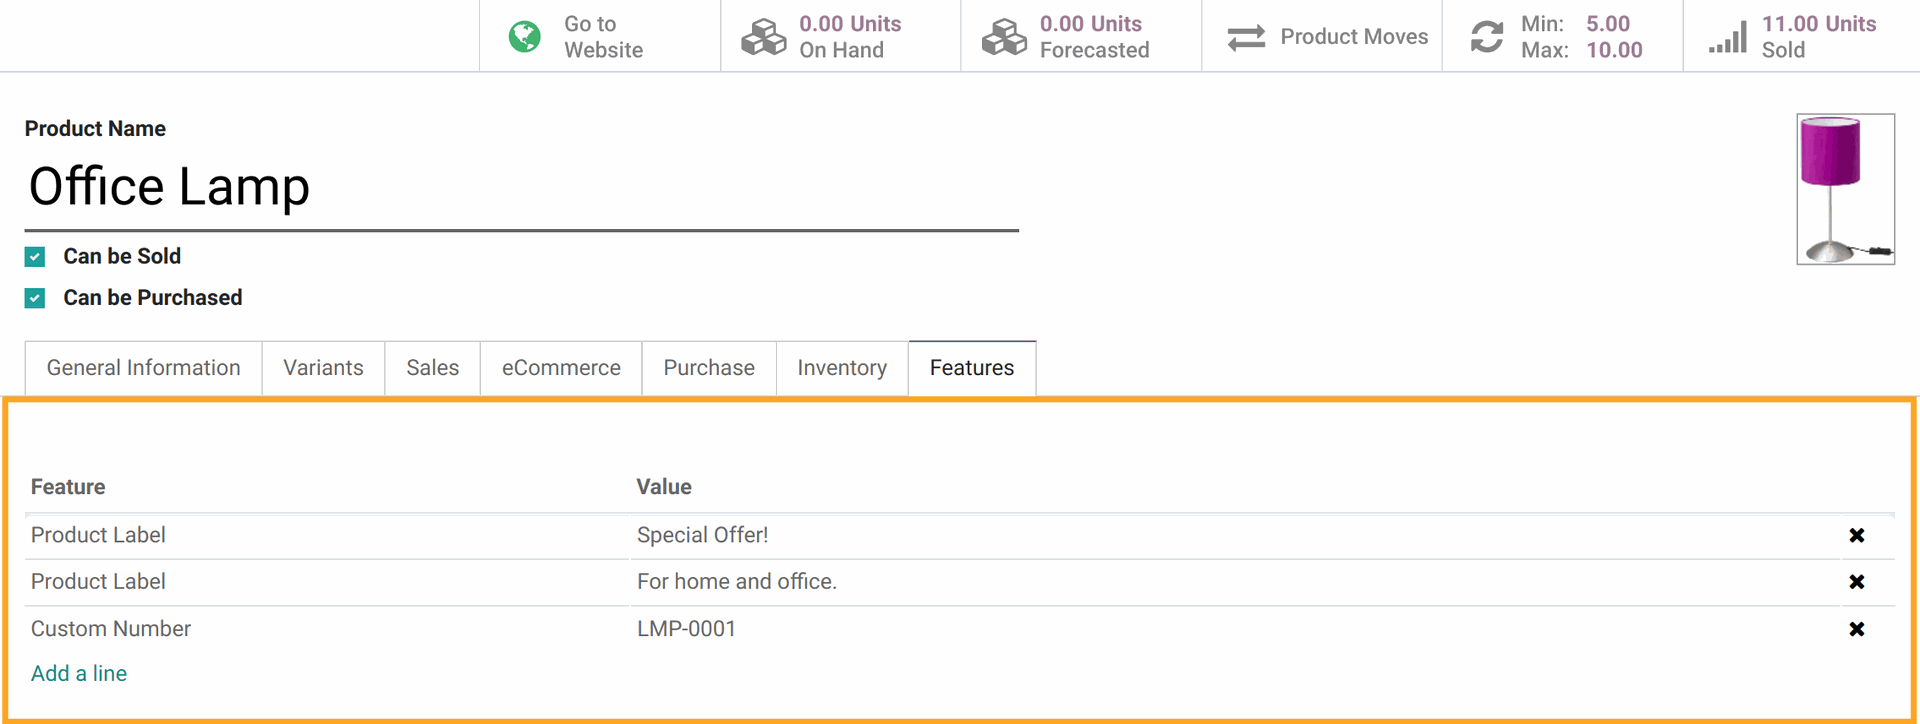 Odoo 15.0 Product Features